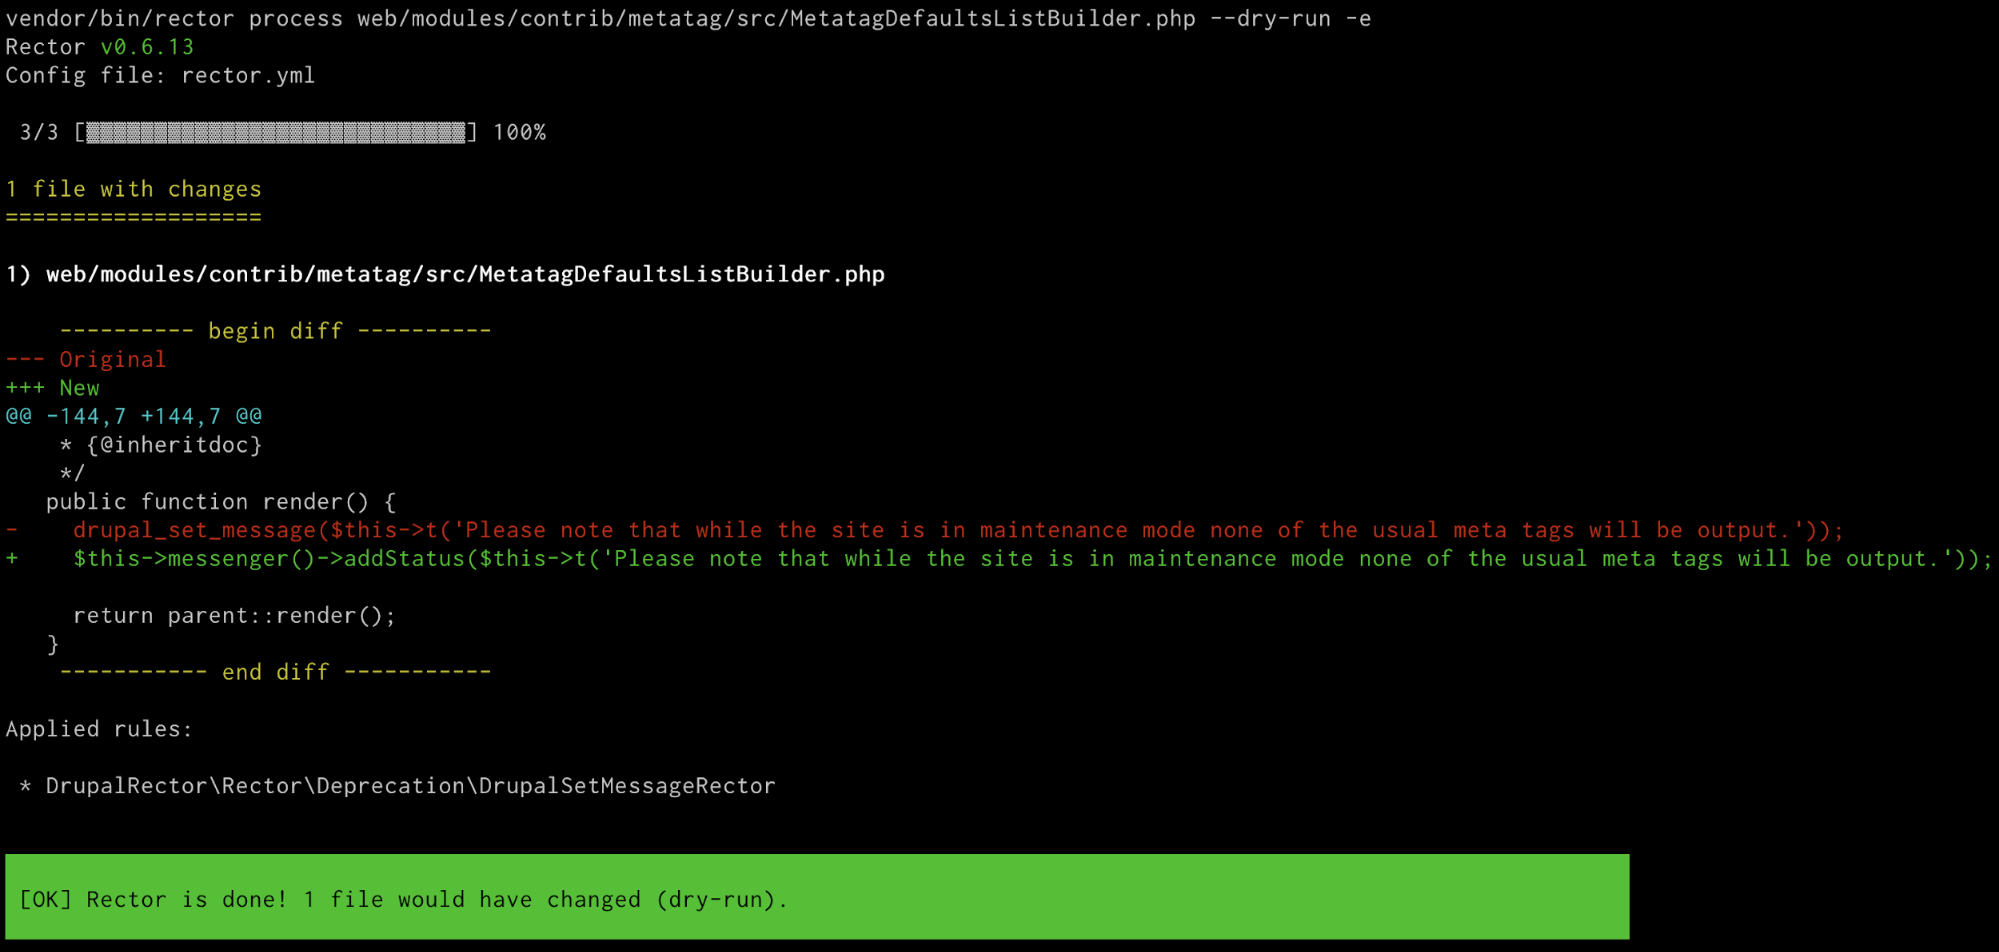 Image of terminal window running composer command for drupal-rector